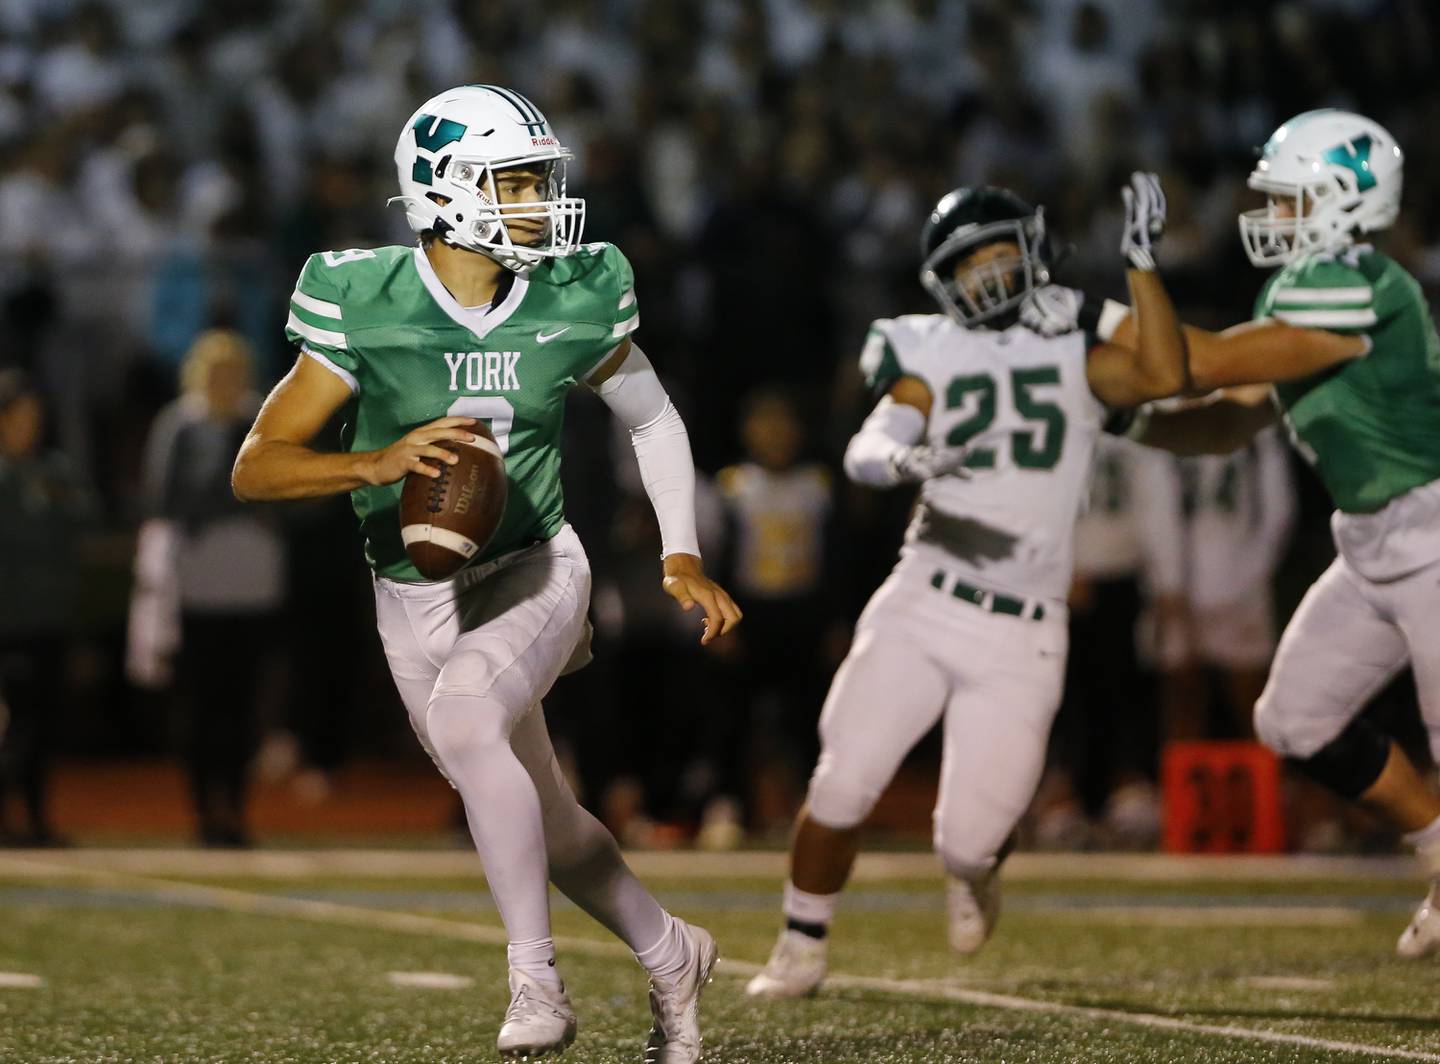 York's Matt Vezza (9) fades back to pass during the boys varsity football game between York and Glenbard West on Friday, Sept. 30, 2022 in Elmhurst, IL.